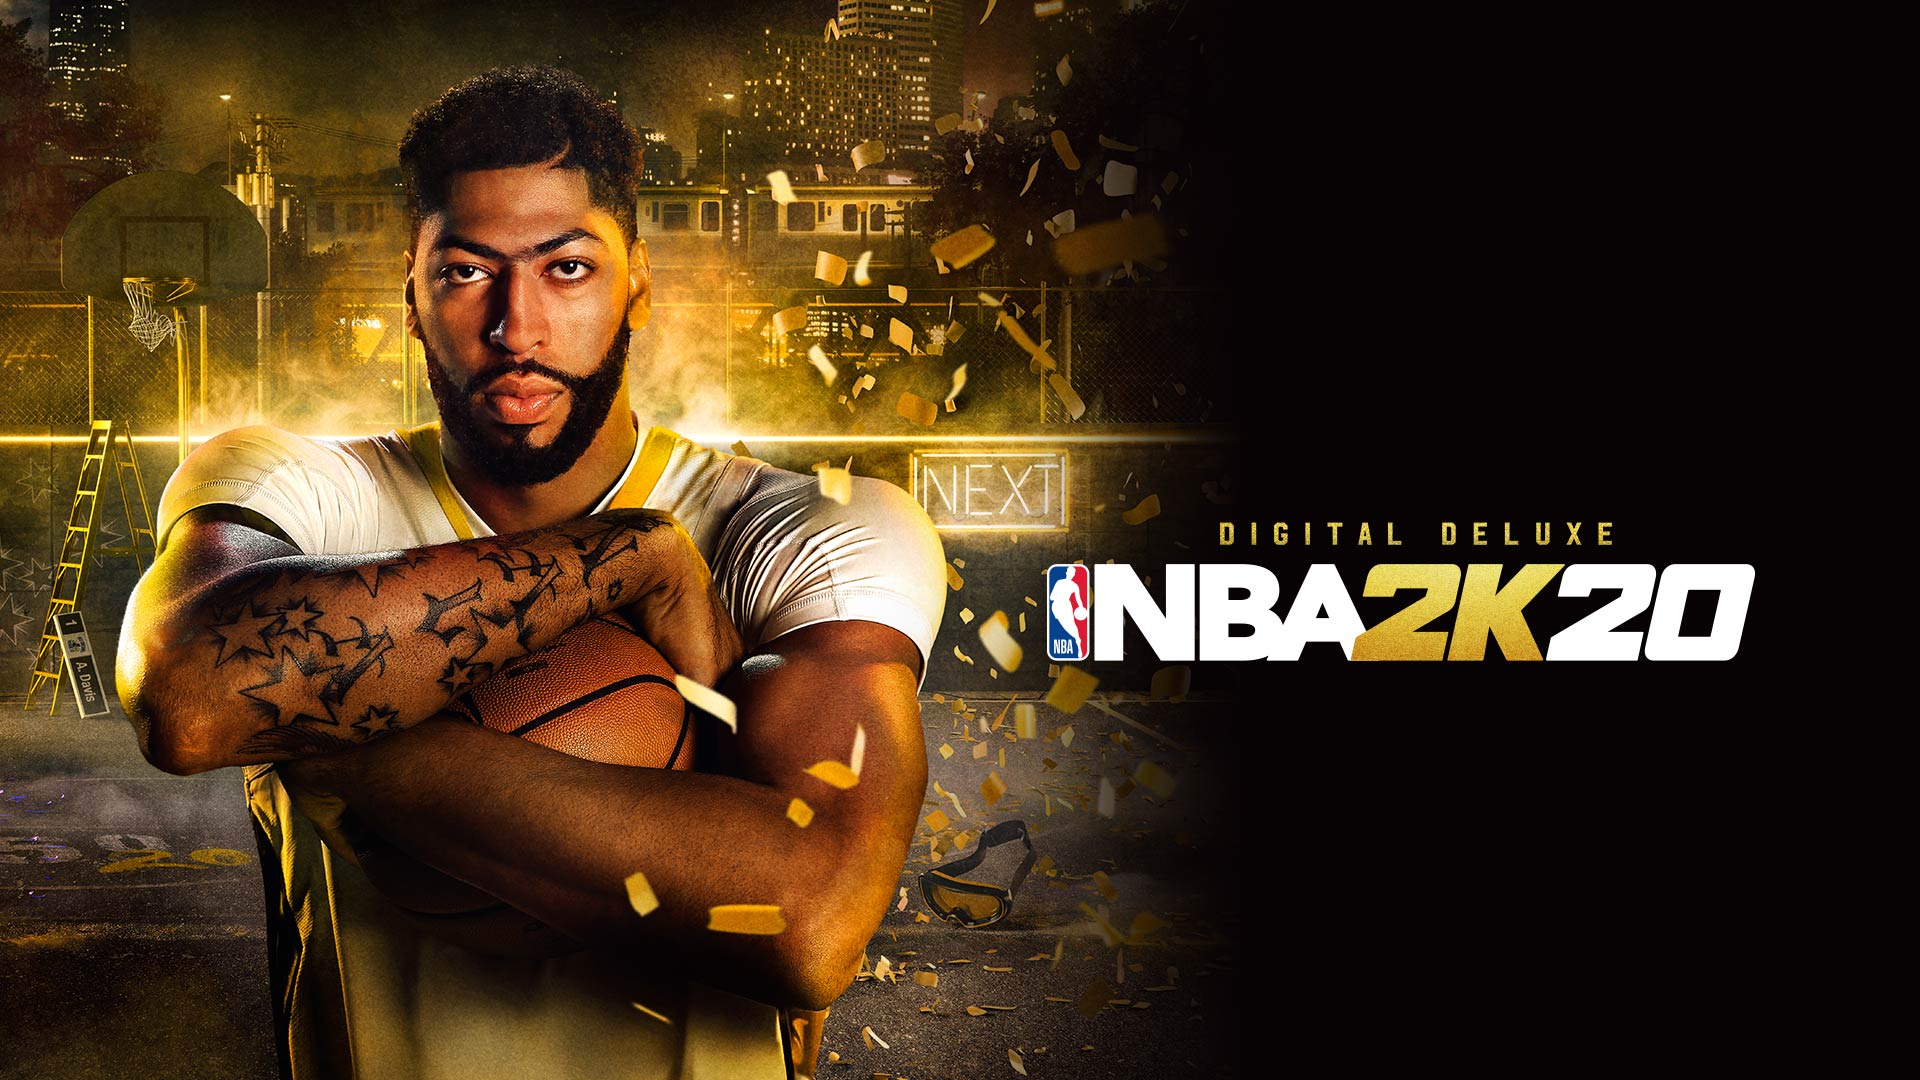 NBA 2K20 Digital Deluxe on PS4 | Official PlayStation™Store Canada